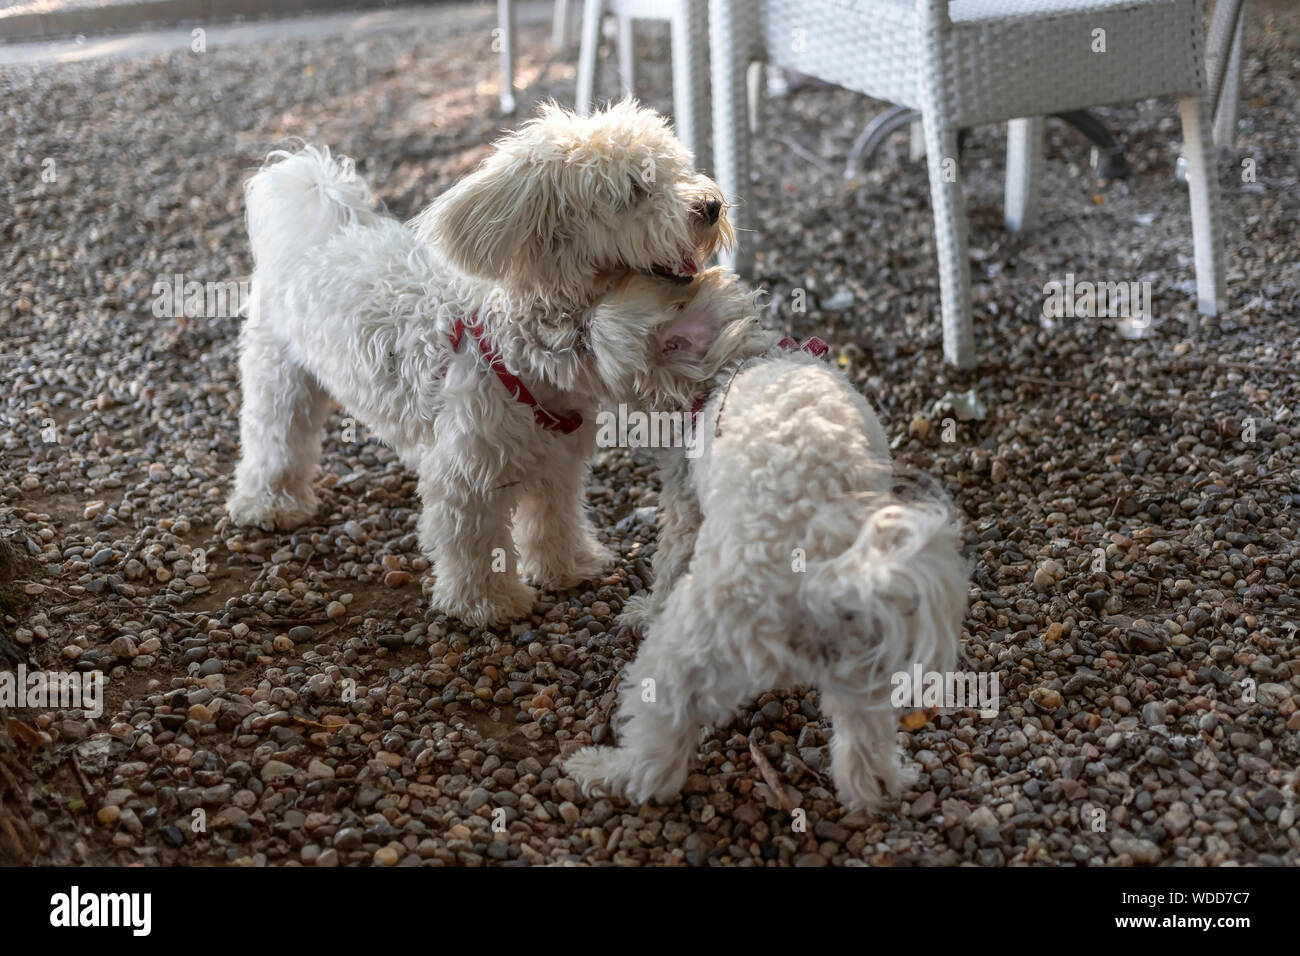 Nanja, Bichon Bolognese doggie (left), and Maltese dog Baky playing at the coffee shop terrace Stock Photo